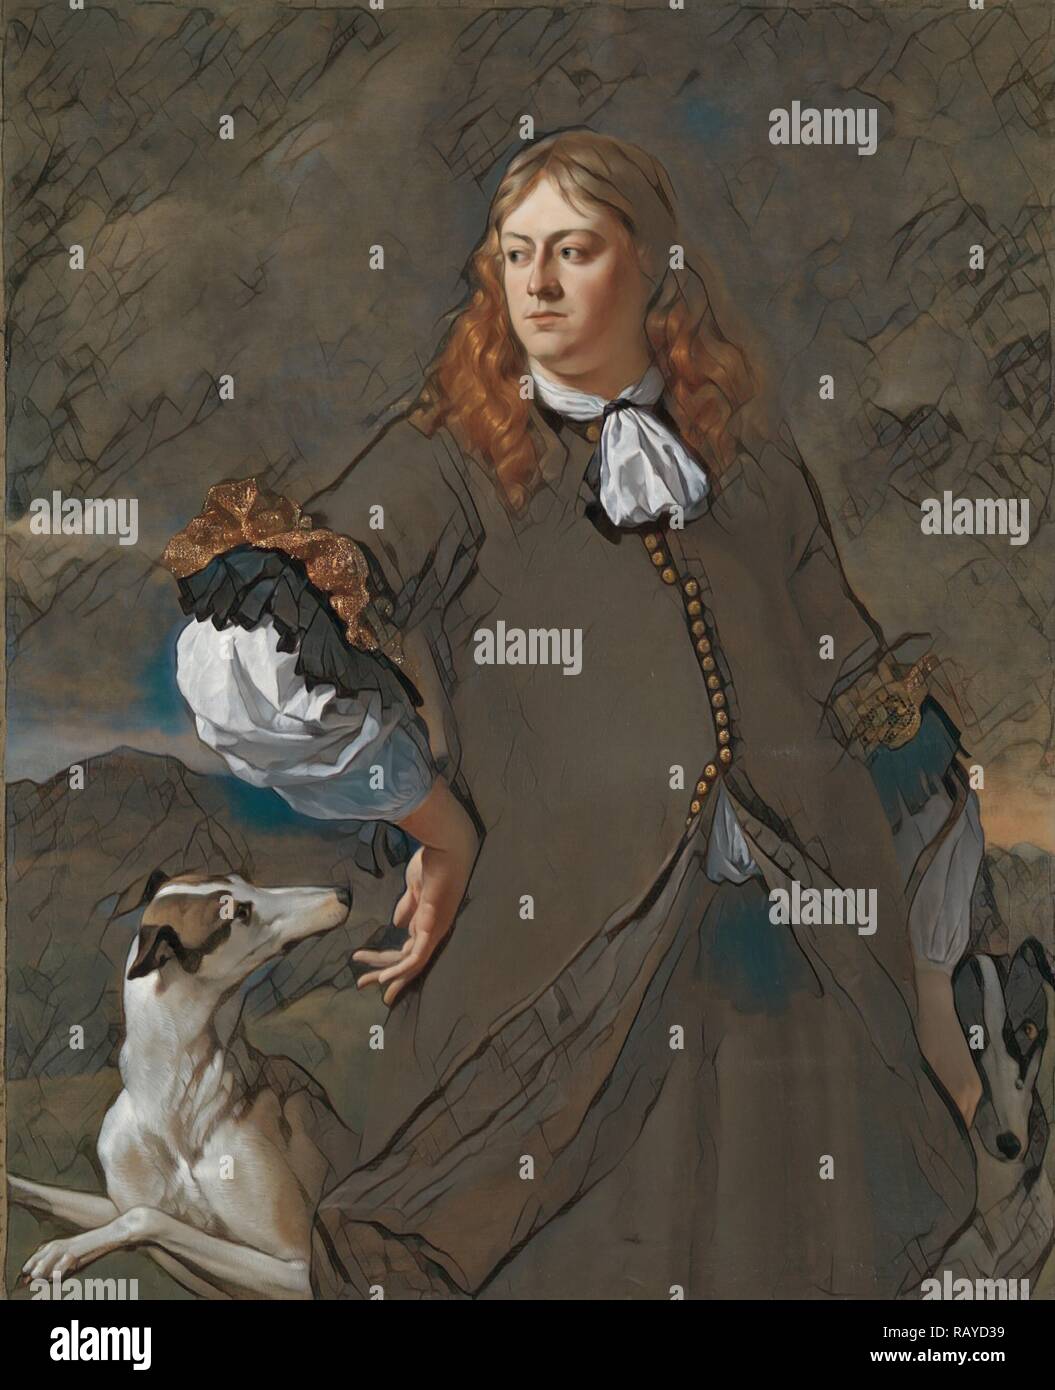 Portrait of Joan Reynst, Lord of Drakenstein and Vuursche, Captain of the Citizenry in 1672, Karel Dujardin, 1670 reimagined Stock Photo